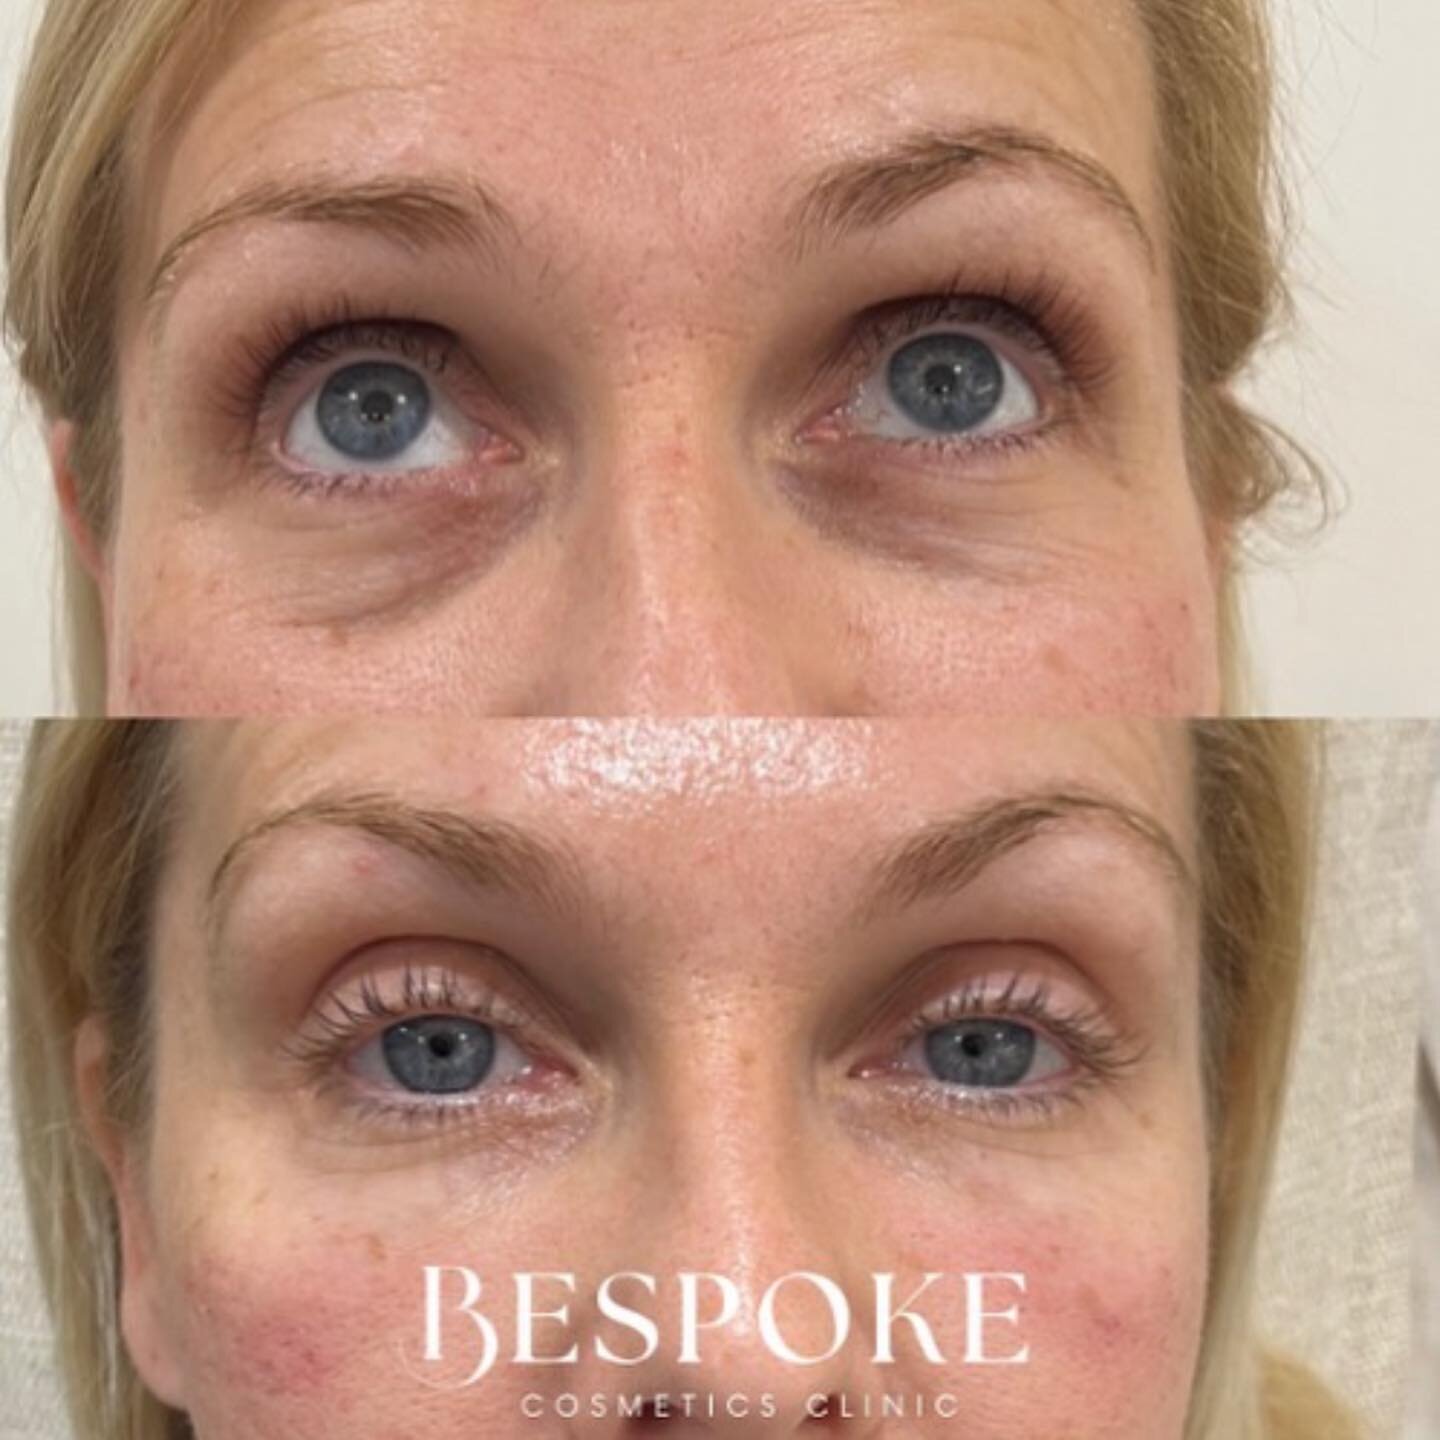 Feeling like you look tired allll the time? We might be able to help! Book a complimentary consultation to see how we can help you! 

All treatments carry risk and require consultation. Our clinic offers consultations on how to improve the under eye 